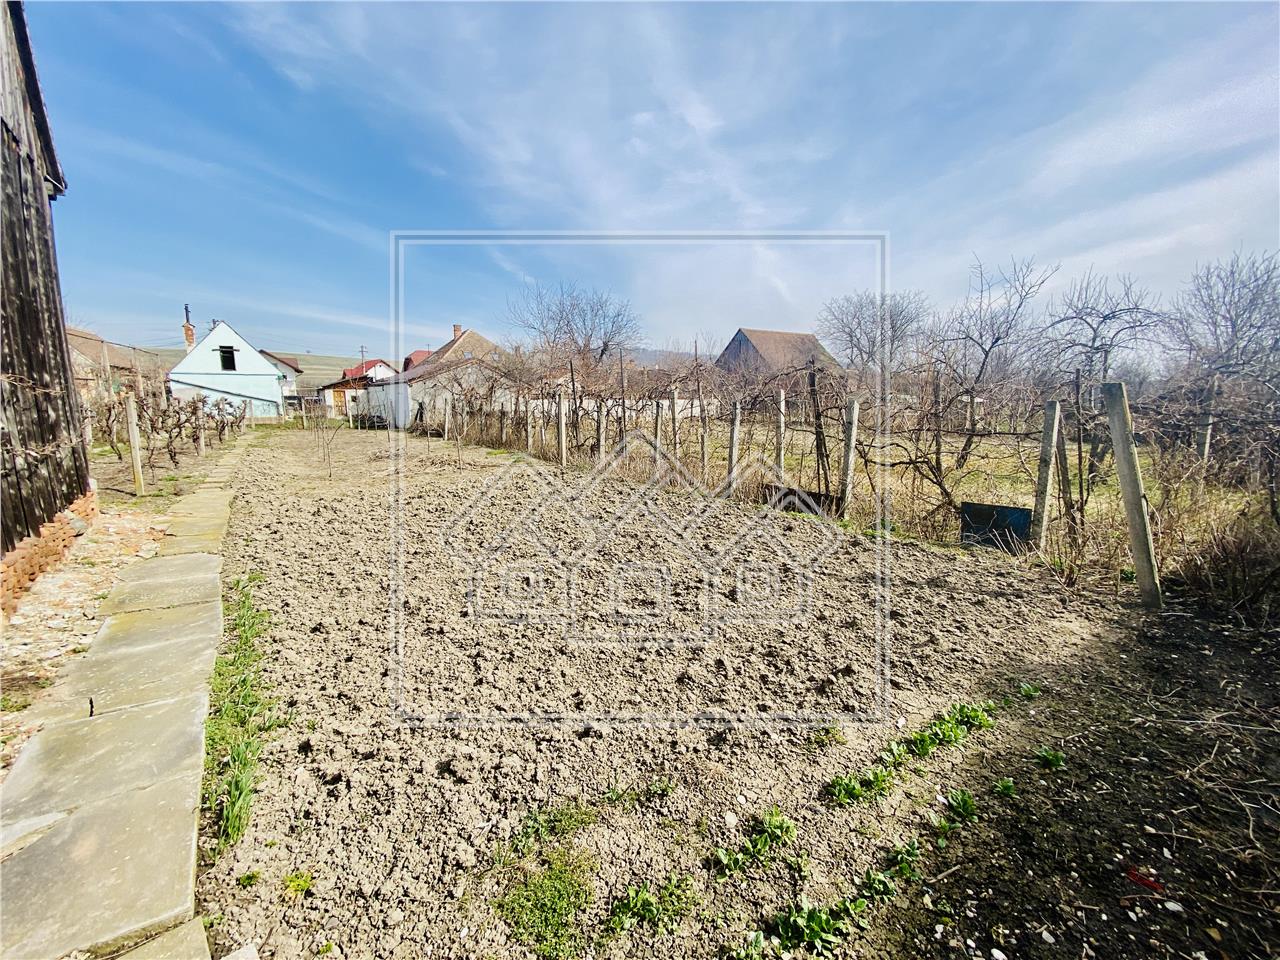 House for sale in Sibiu - individual - 1300 sqm land - Cristian